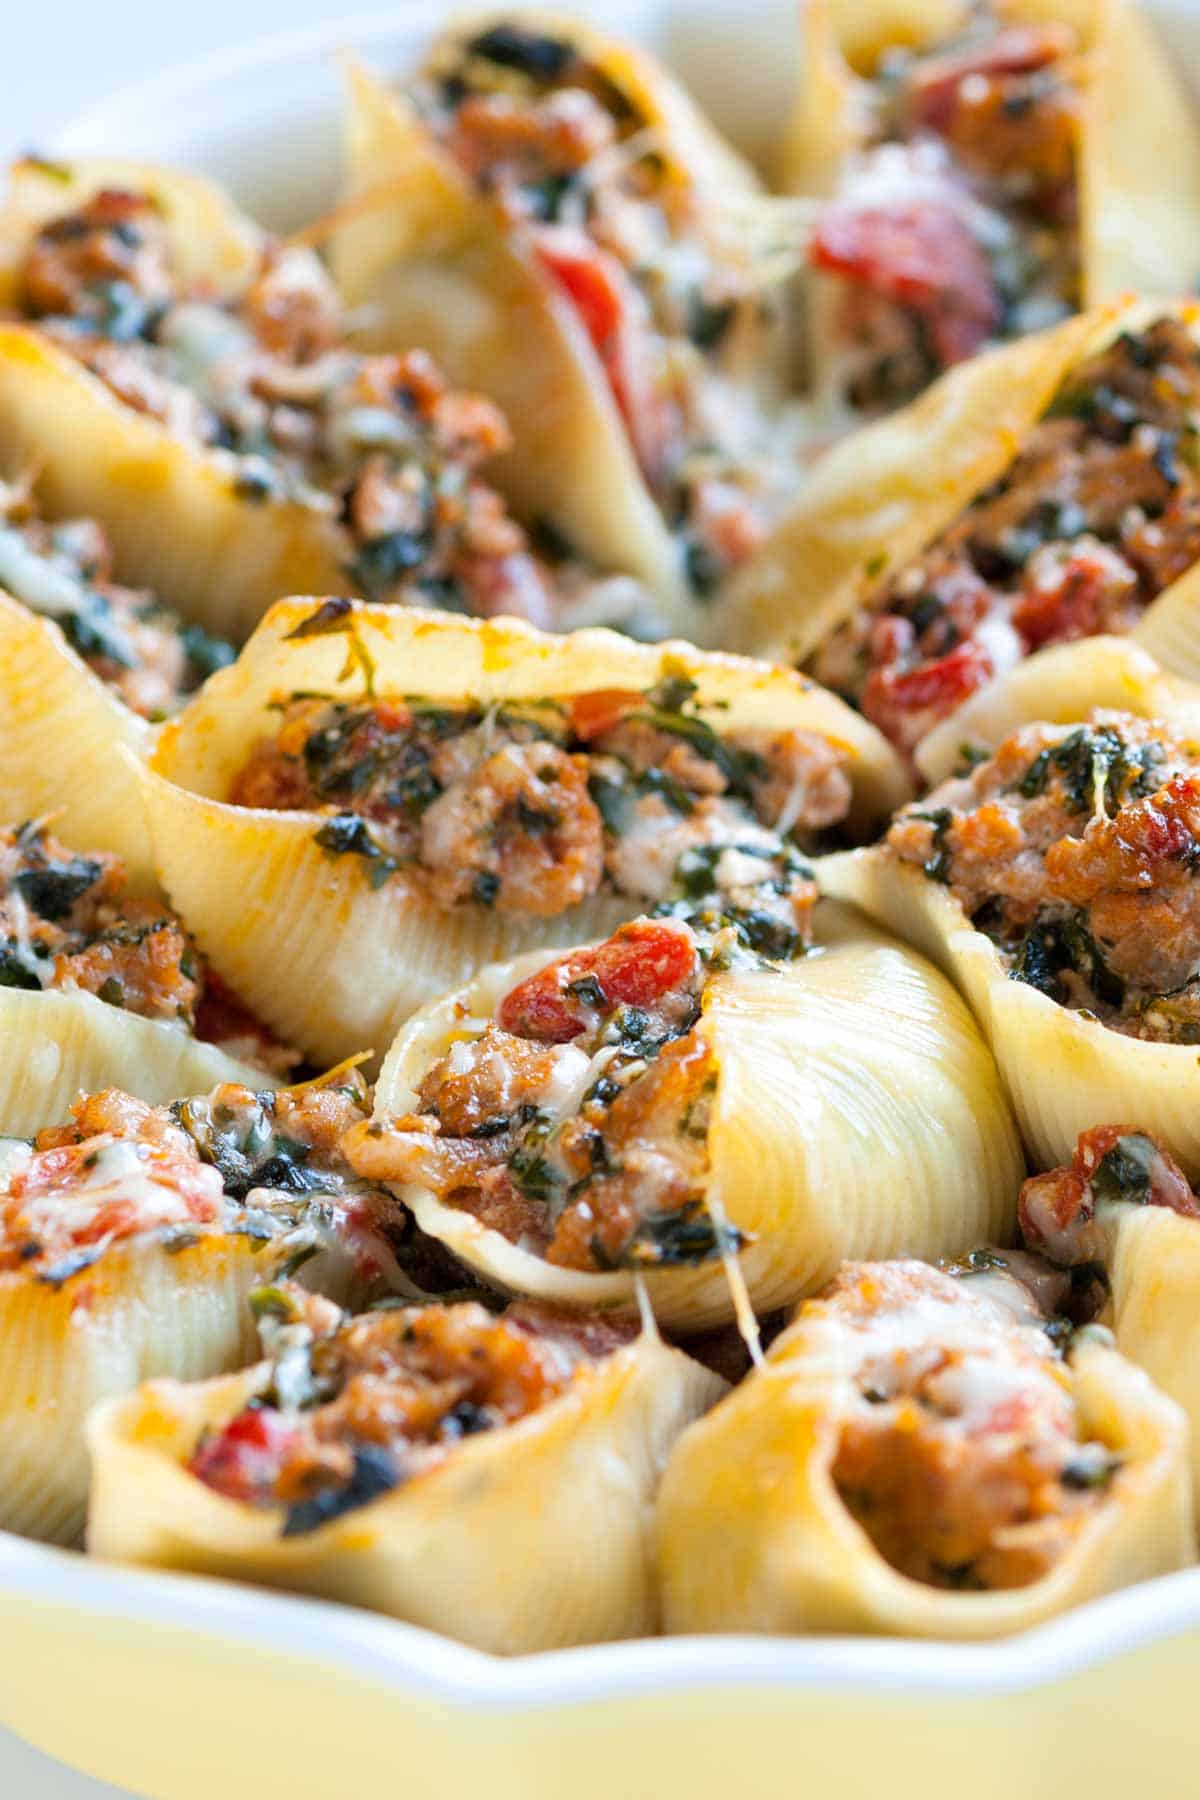 Sausage Stuffed Shells Recipe with Spinach